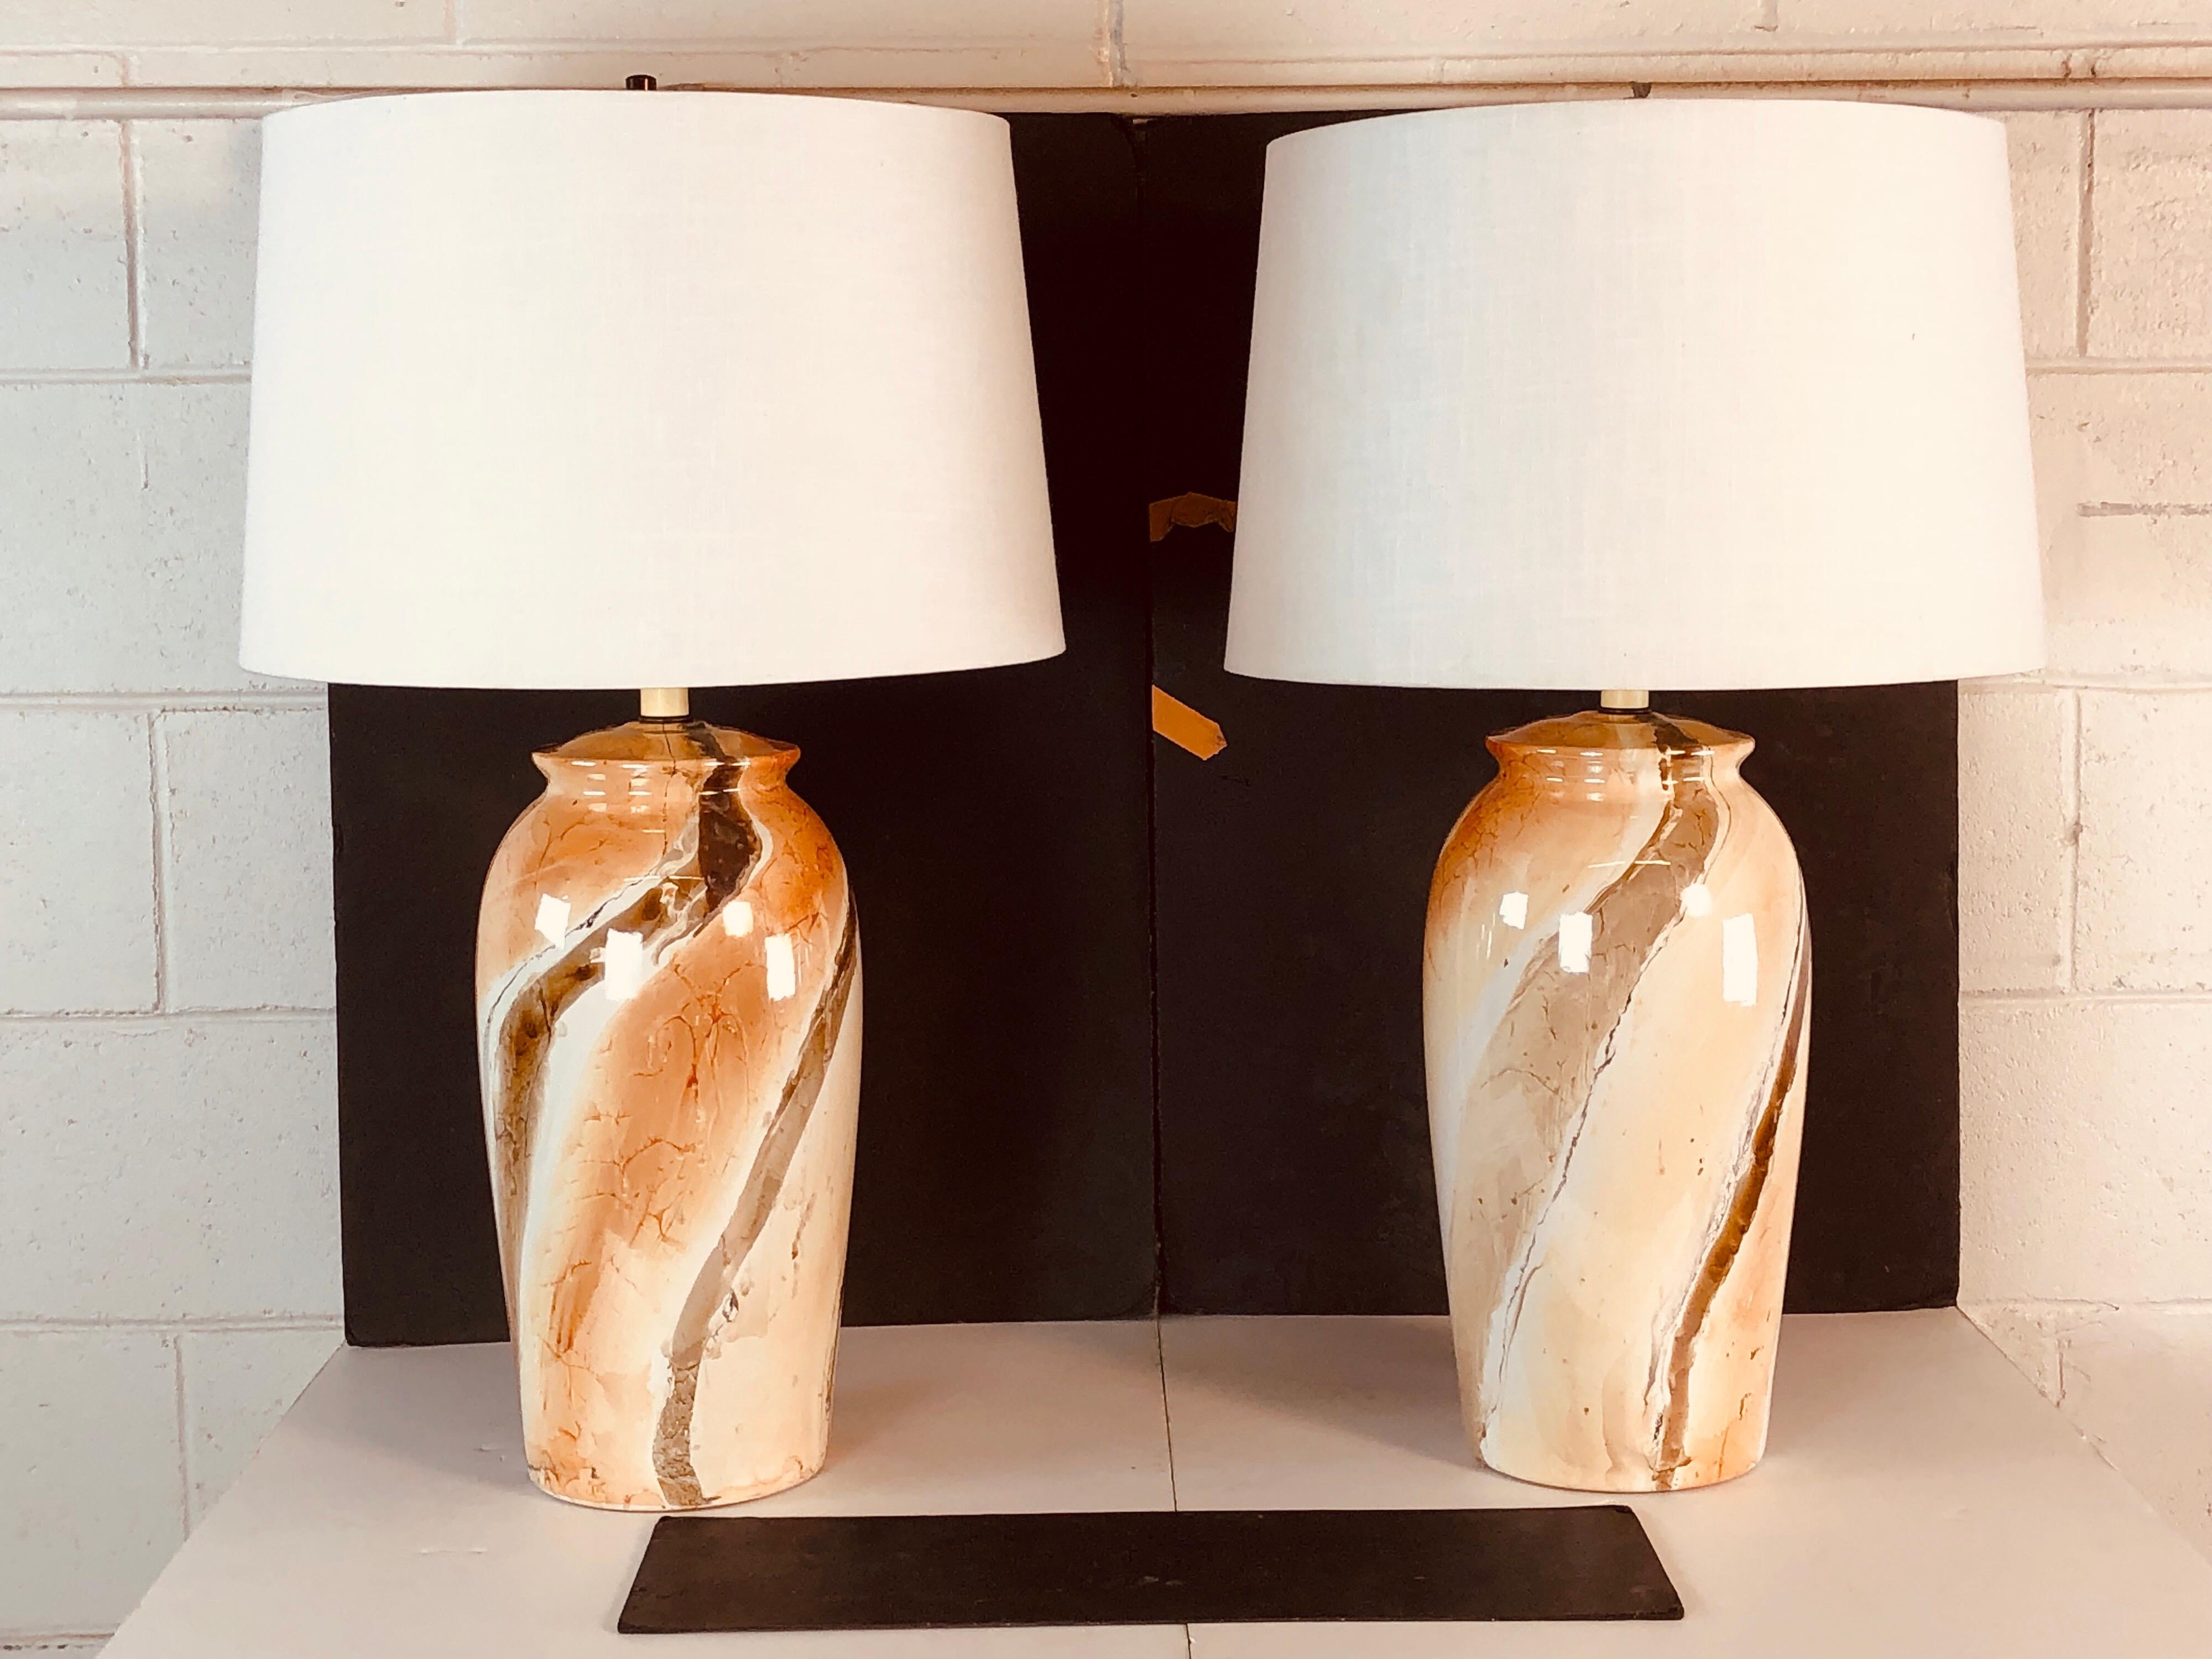 1970s pair of marble style tall ceramic table lamps. The lamps are wired for the US and in working condition. Socket, 21” height. Harp, 4.25” diameter x 9.5” height. No maker’s mark.
Shades are not included.